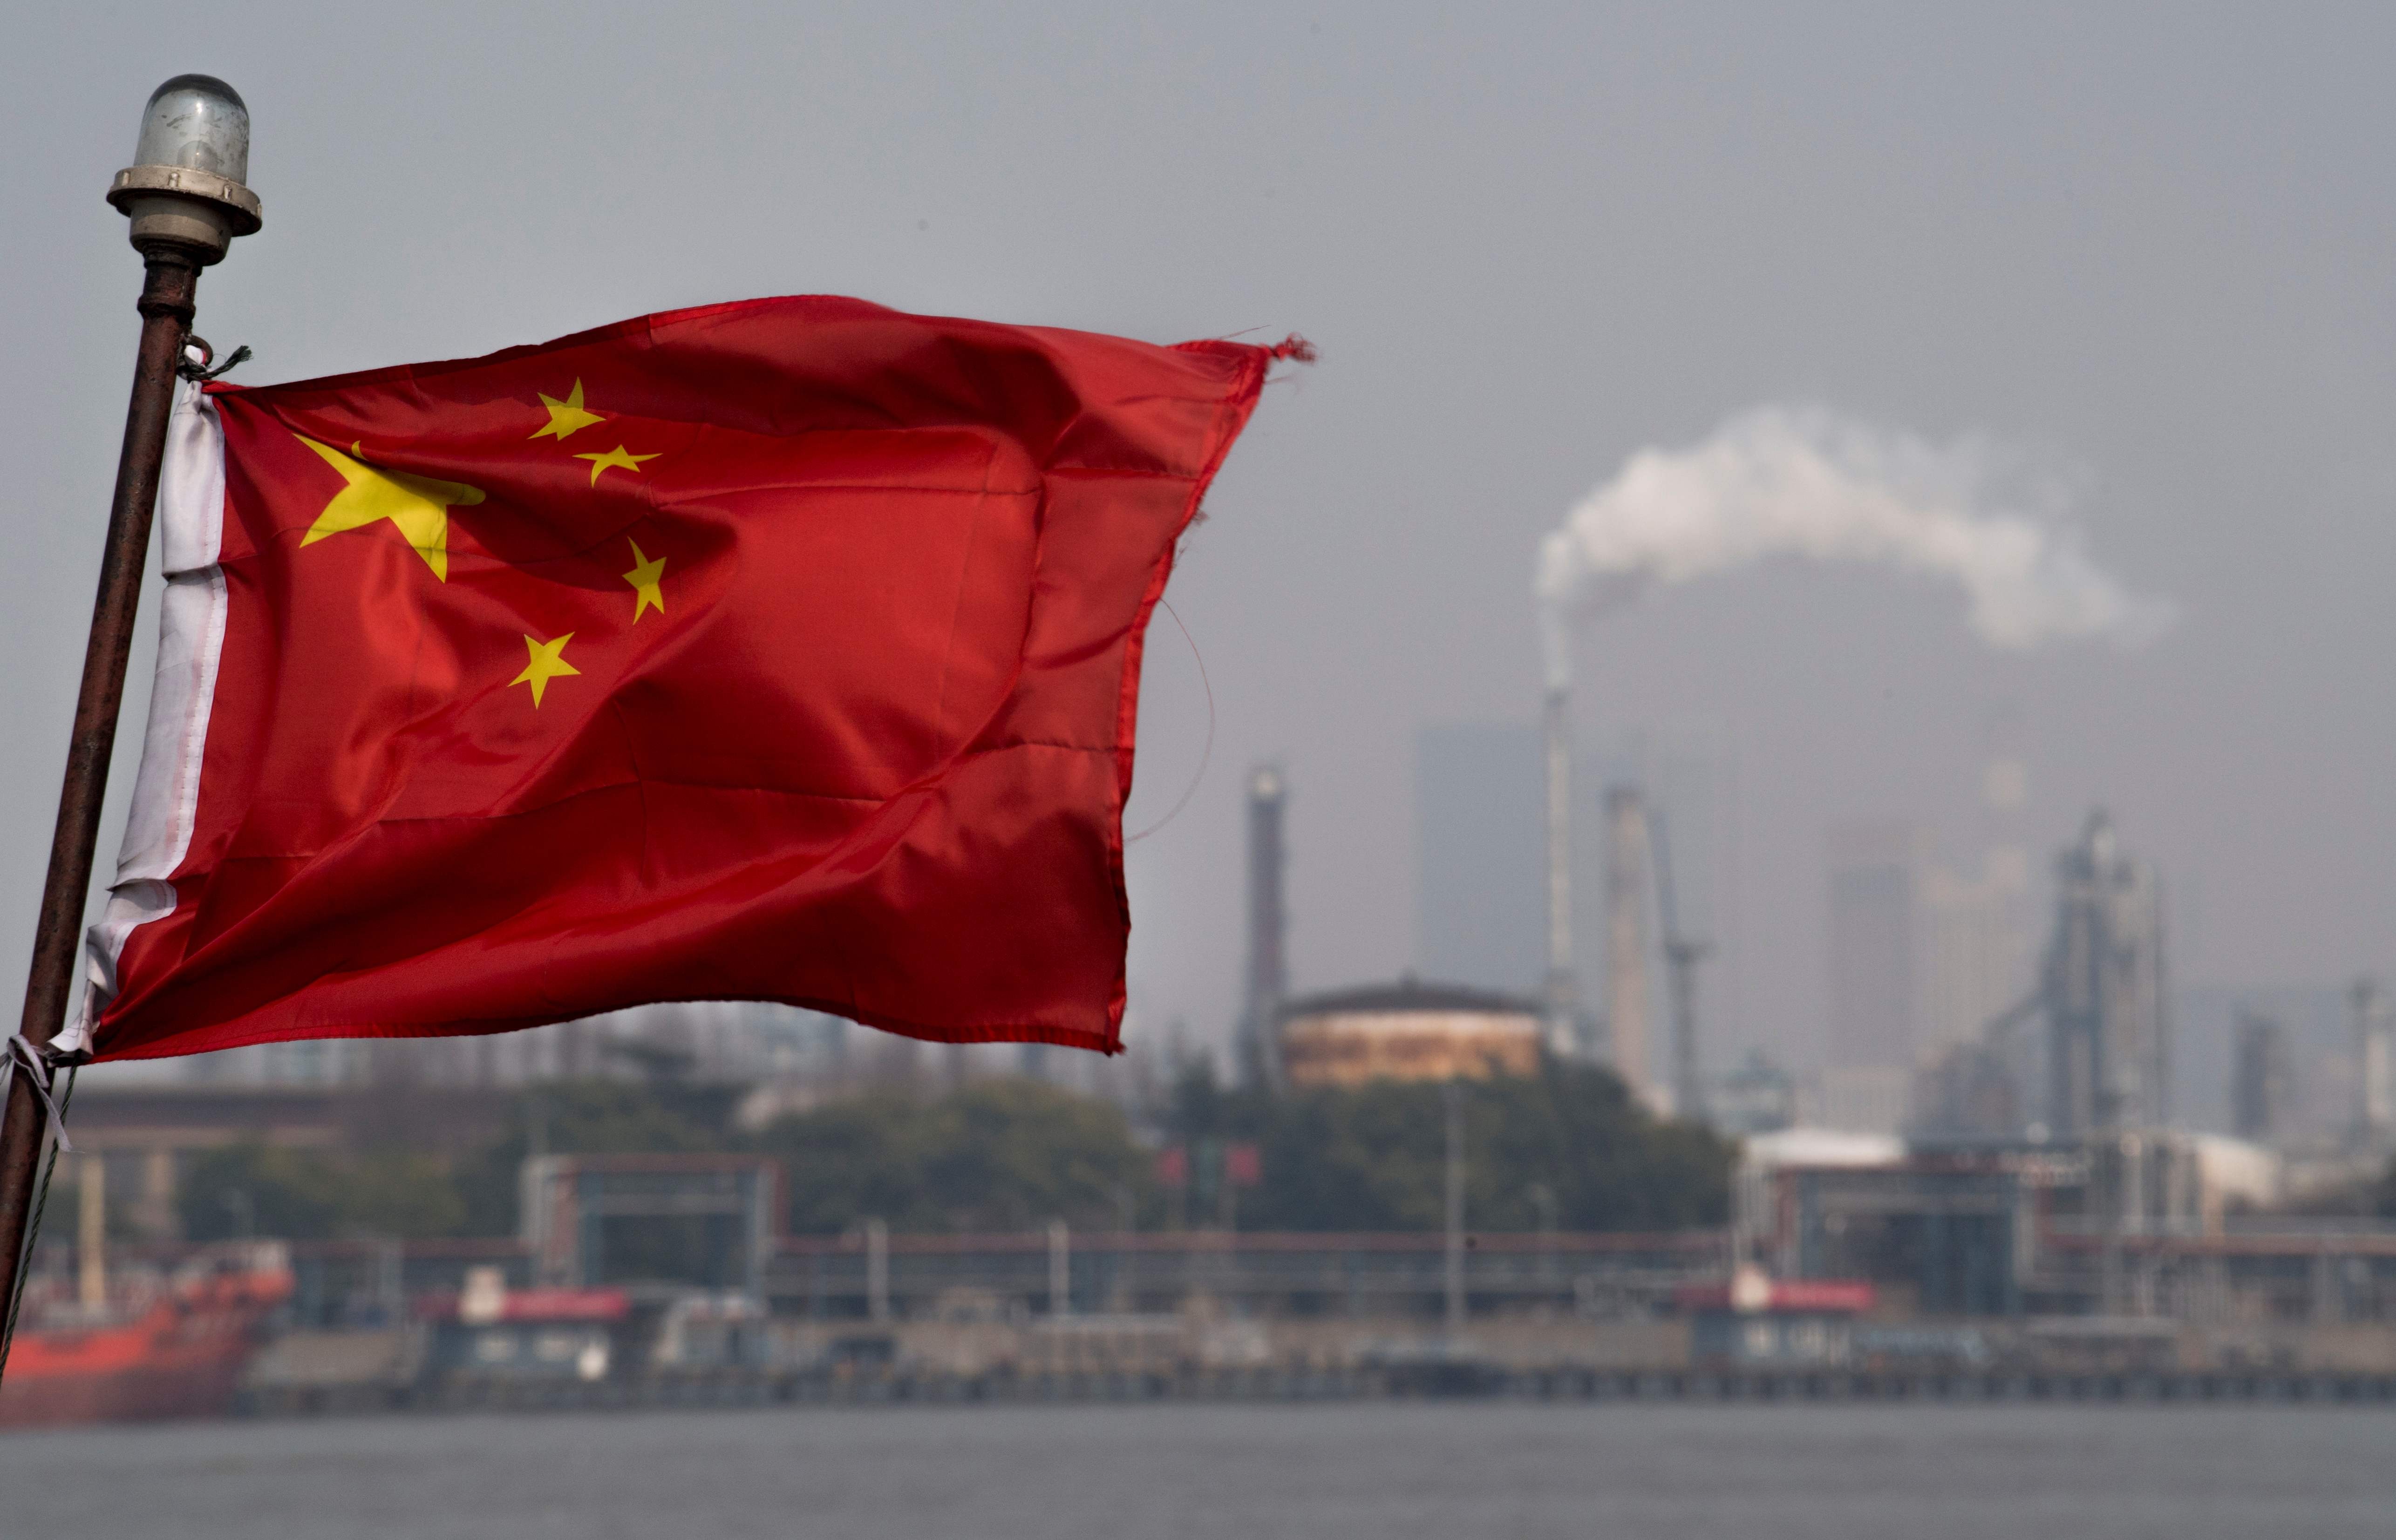 A Chinese flag flutters in front of a Sinopec Shanghai Gaoqiao refinery. China’s yuan-denominated oil futures, launched in March, have overtaken in volume the dollar-denominated oil futures traded in Singapore and Dubai. Photo: AFP